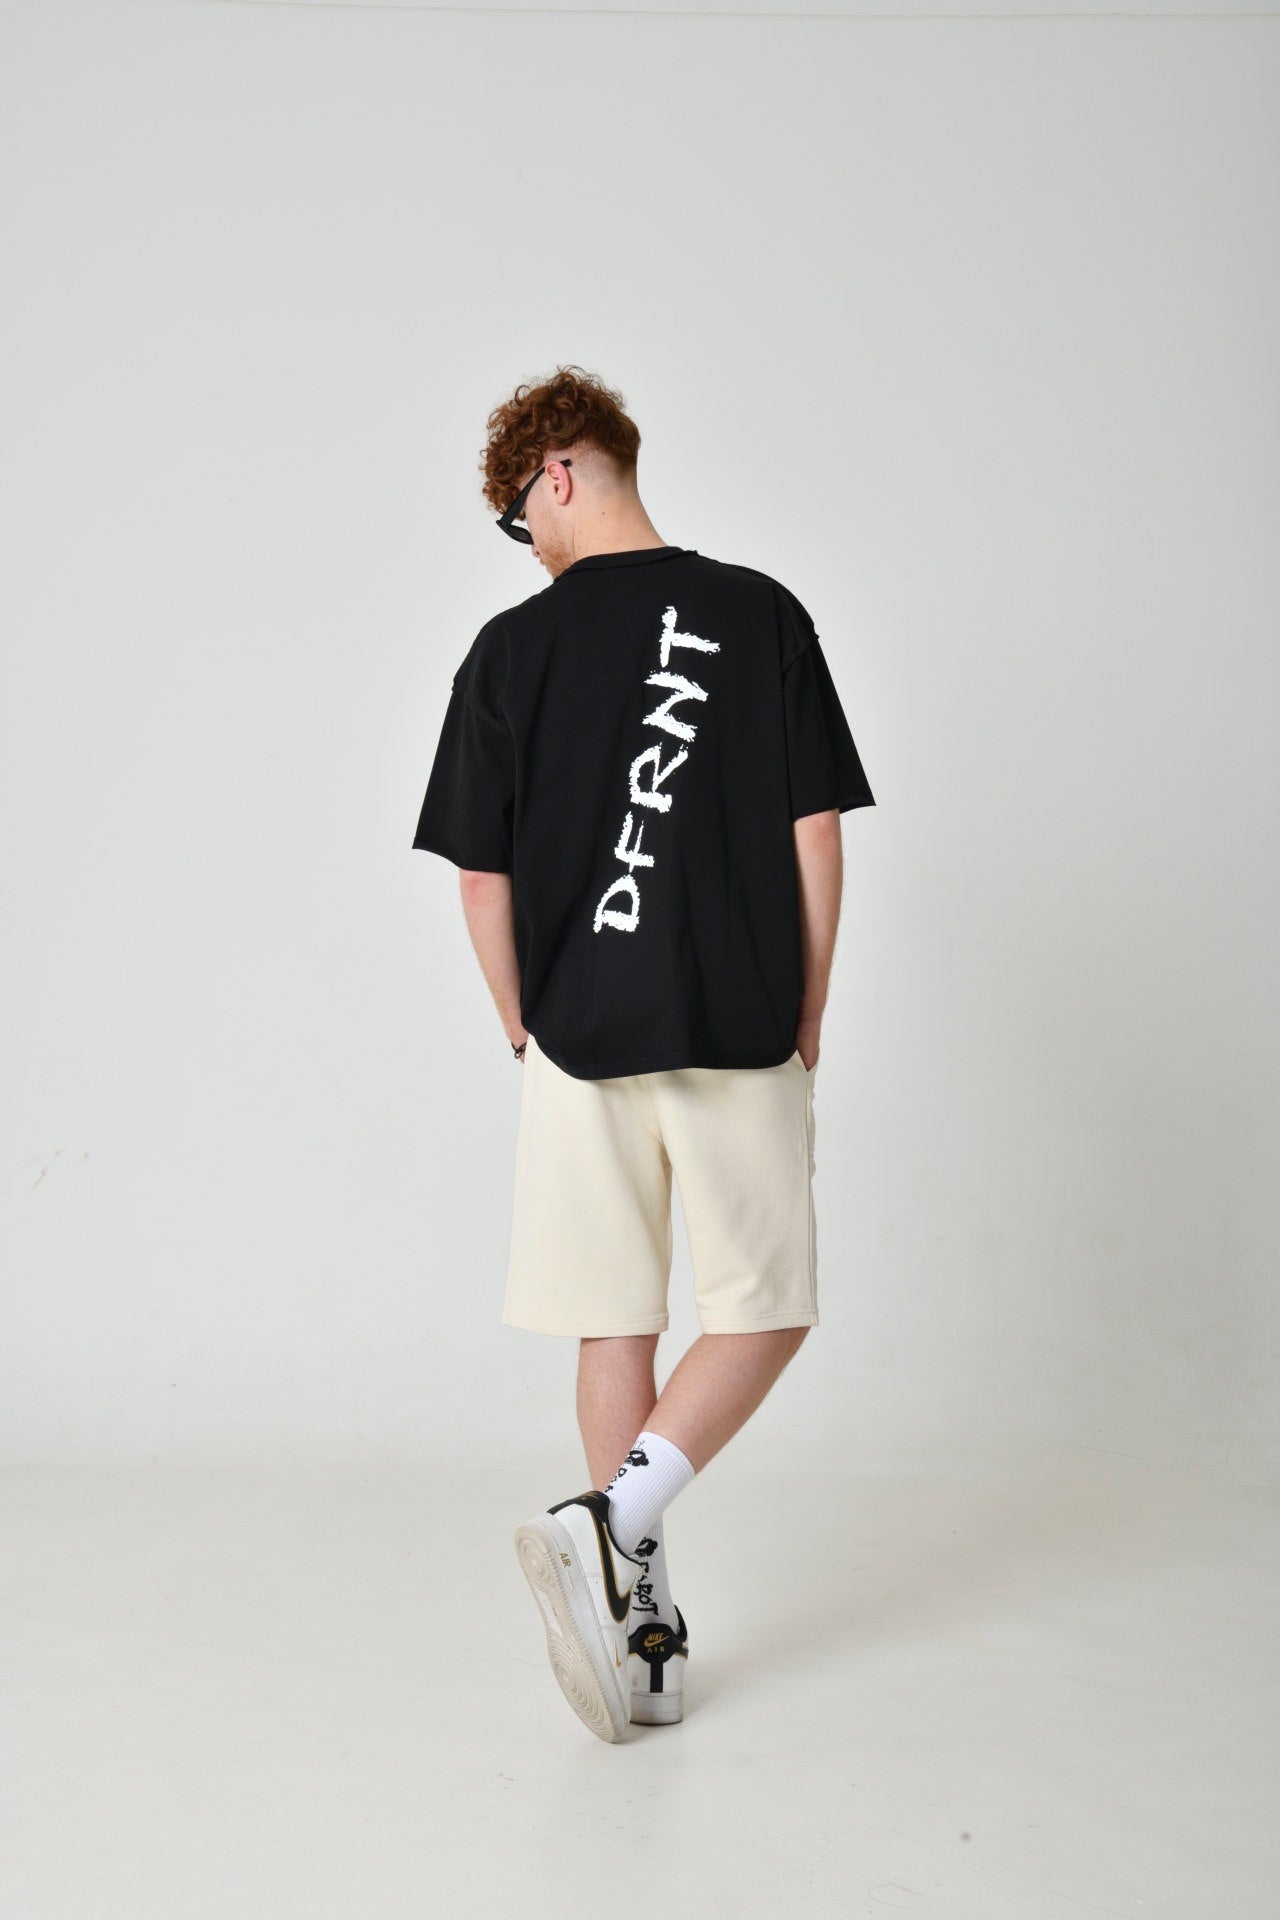 Black T-Shirt With A Print On The Back From DFRNT